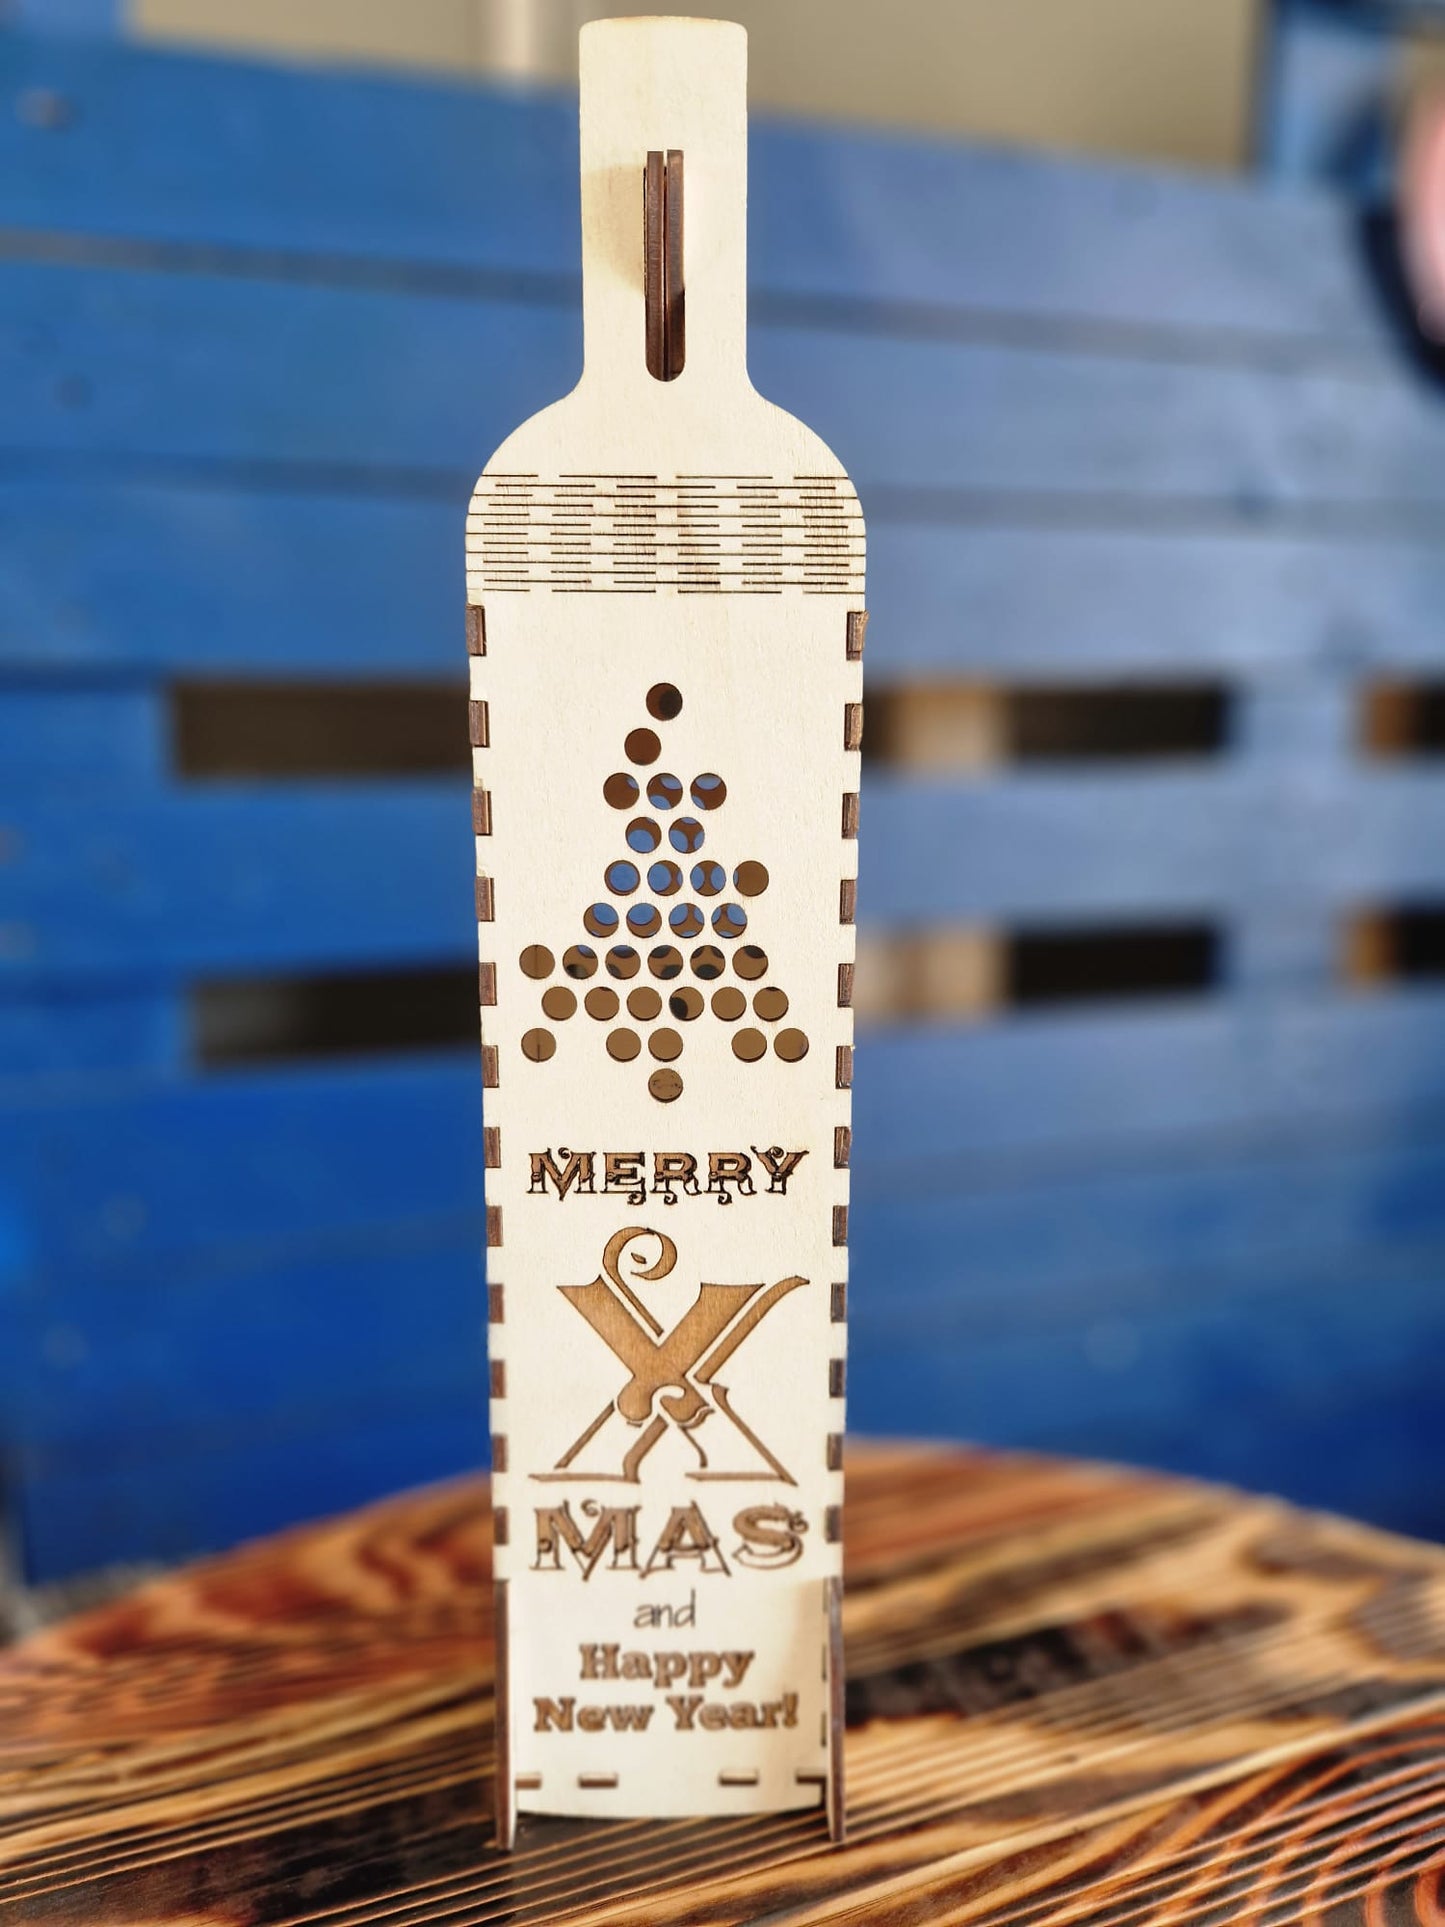 Wooden wine packaging with saying: "Merry X Mas"